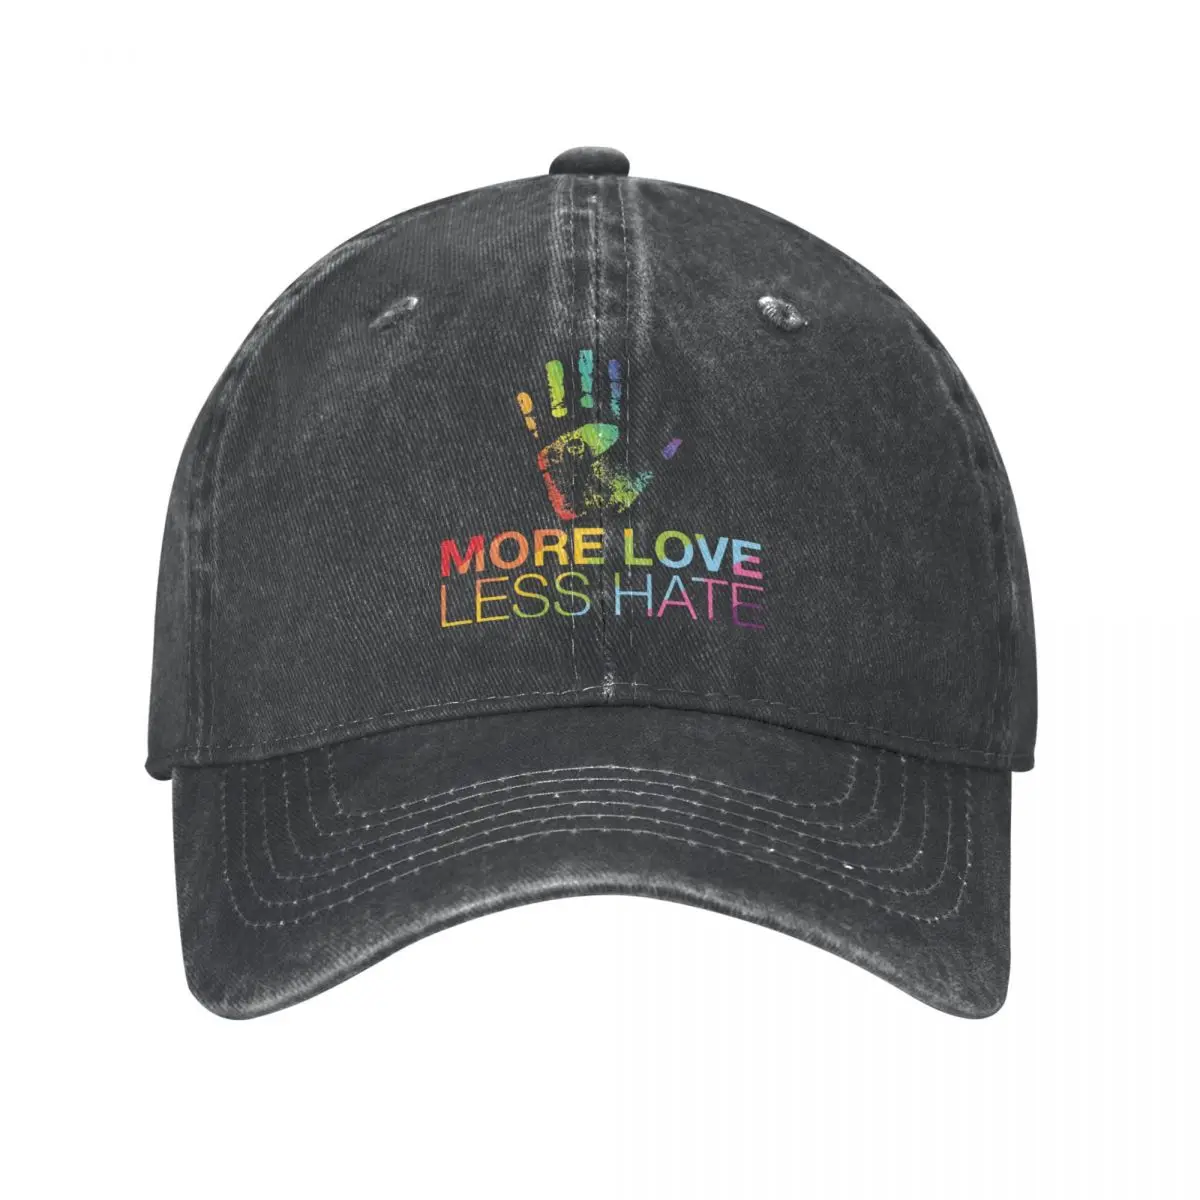 

More Love Less Hate Men Women Baseball Caps Gay Pride LGBT Distressed Washed Hats Cap Casual Outdoor Workouts Headwear